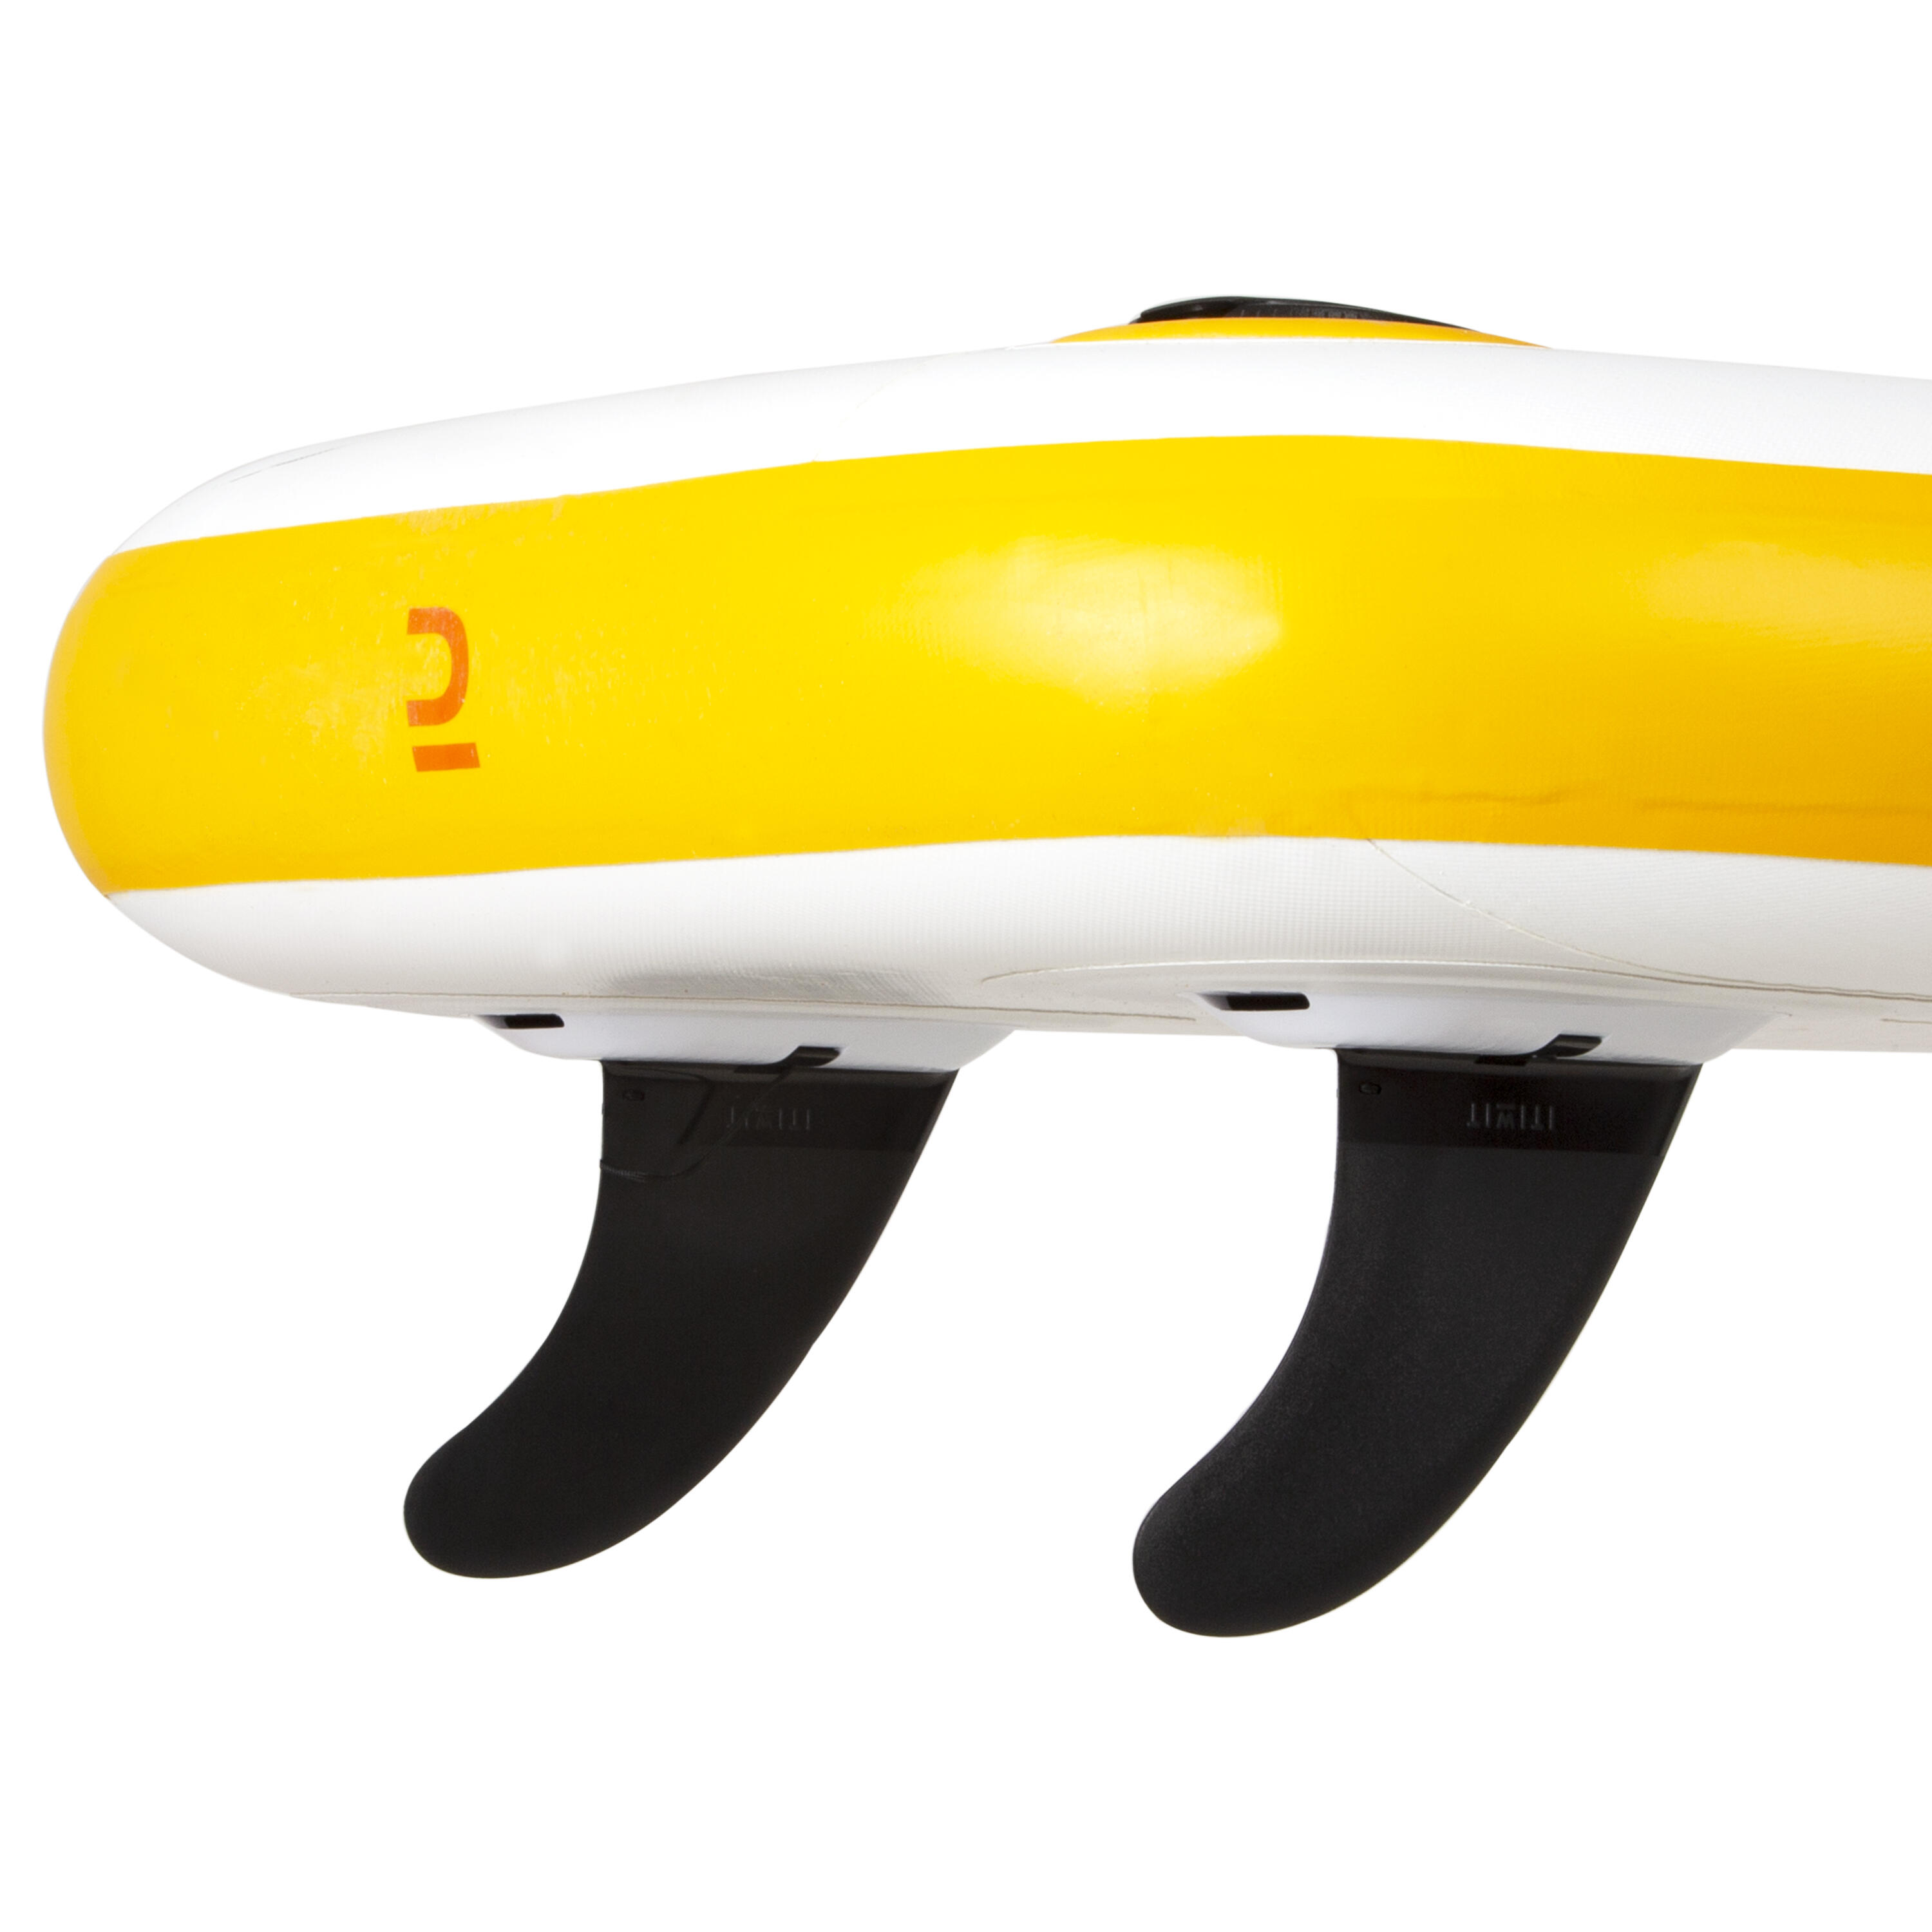 100 COMPACT 8FT (S) INFLATABLE STAND-UP PADDLEBOARD - YELLOW/WHITE (up to 60kg) 9/29